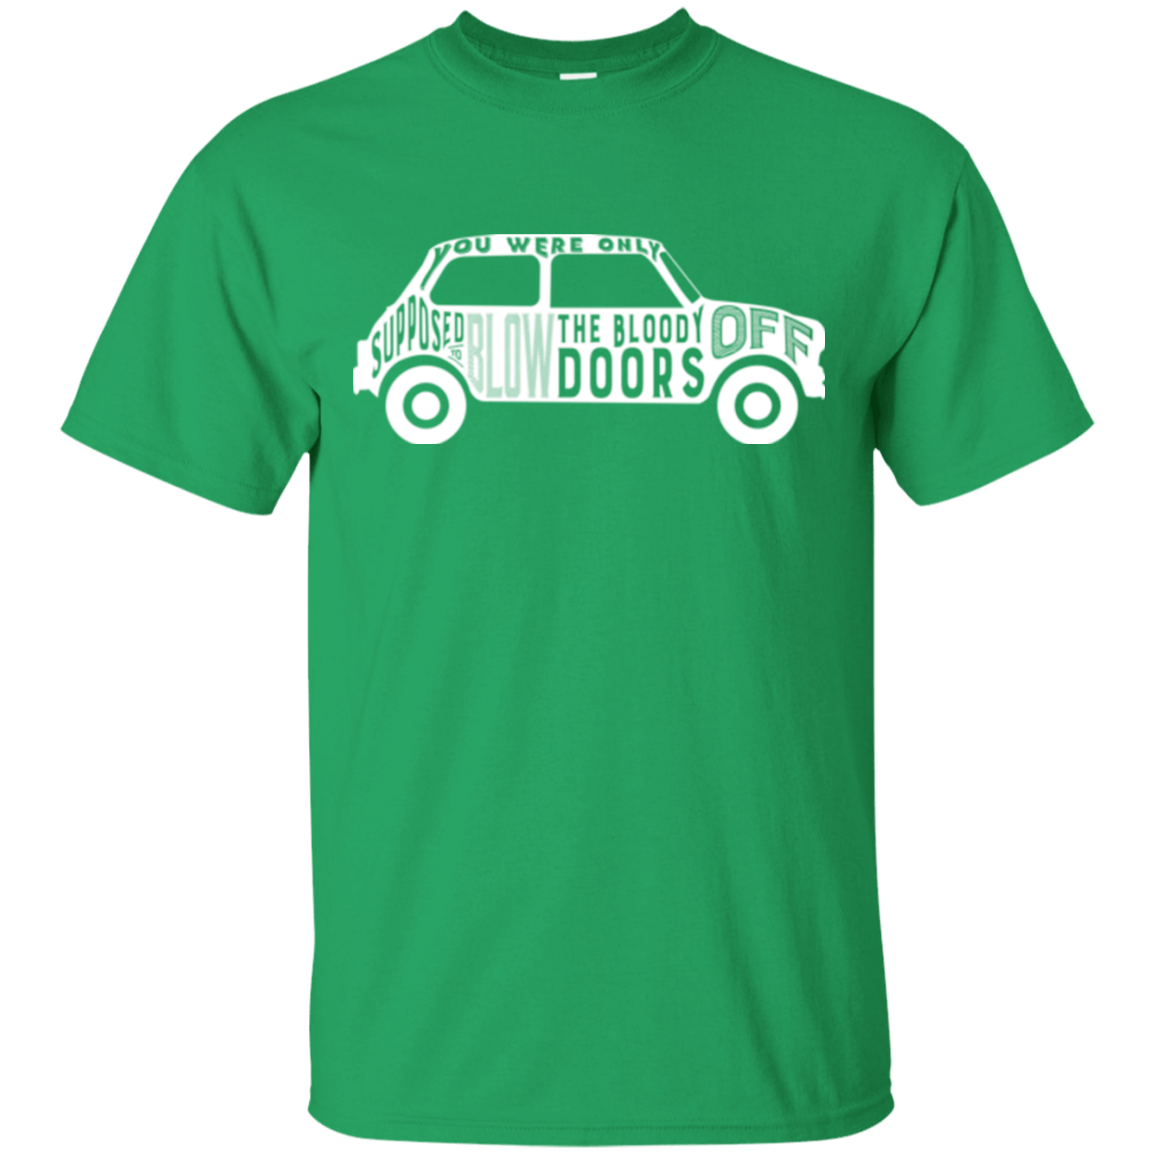 T-Shirts Irish Green / Small You Were Only Supposed To Blow The Bloody Doors Off T-Shirt